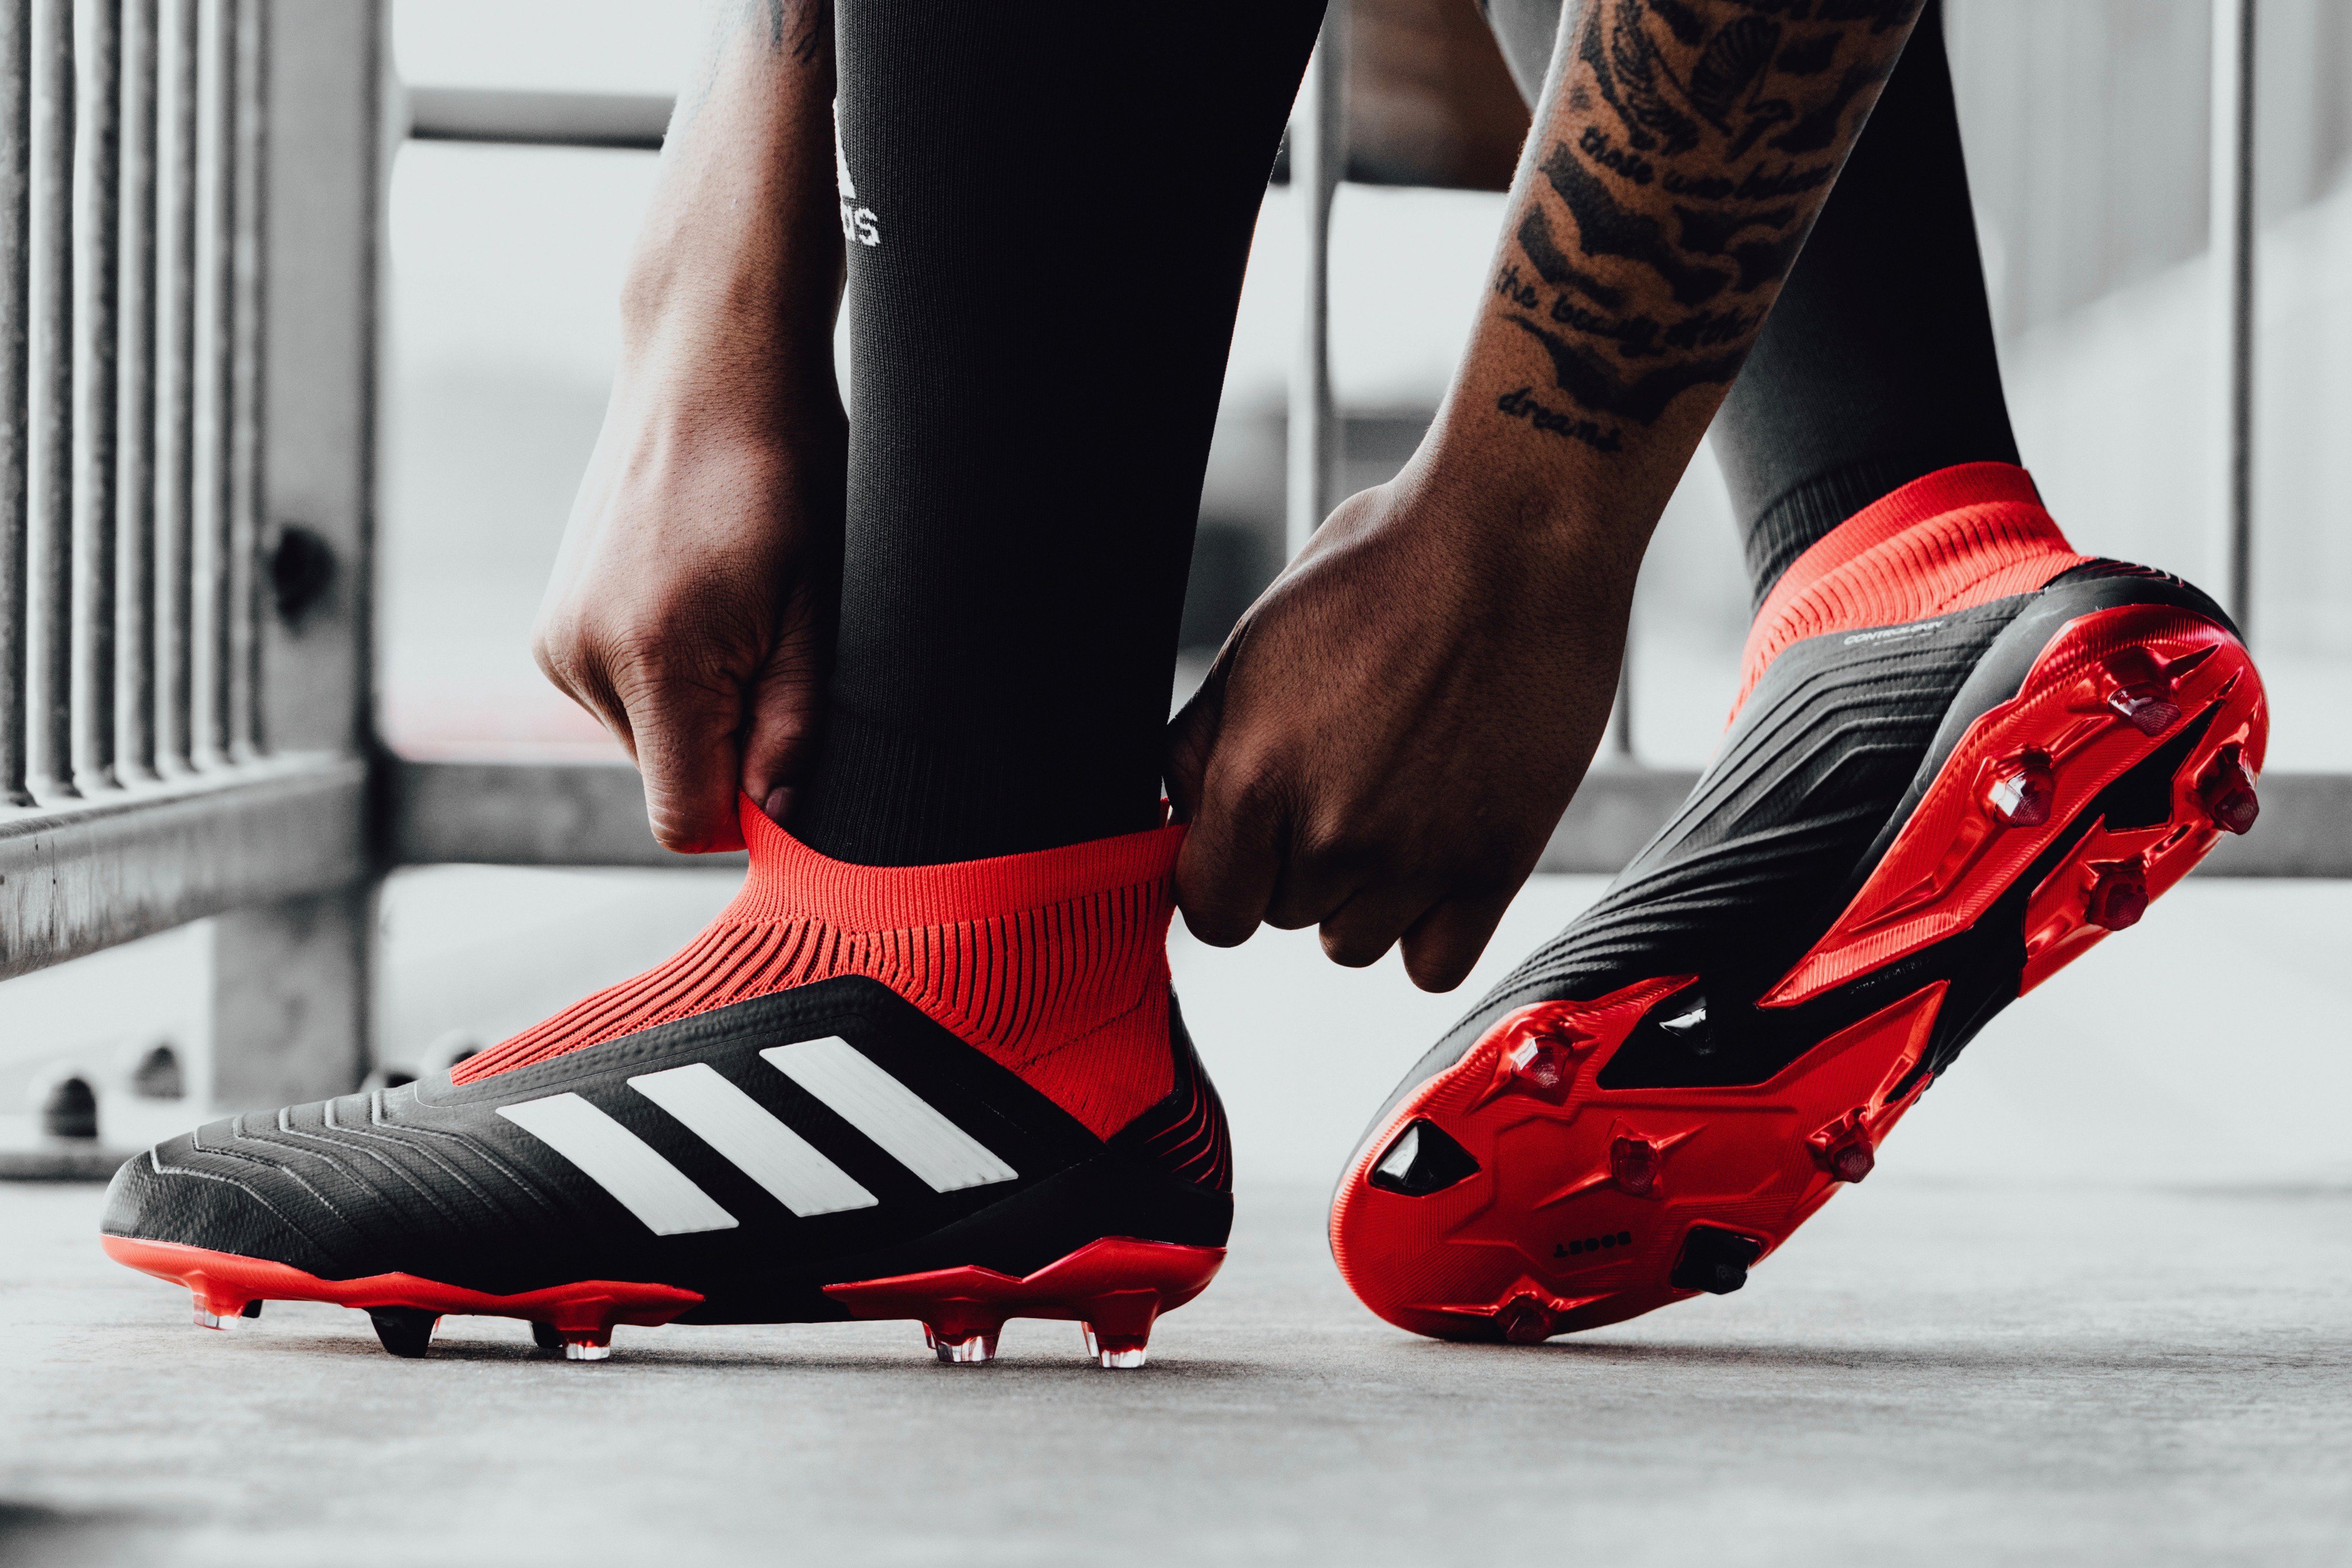 adidas Football på "Introducing the all-new Team Mode pack, exclusively available through adidas and selected retail partners. 👉https://t.co/hClw6EWG5v👈 #HereToCreate https://t.co/tuWKggjjXh" / Twitter